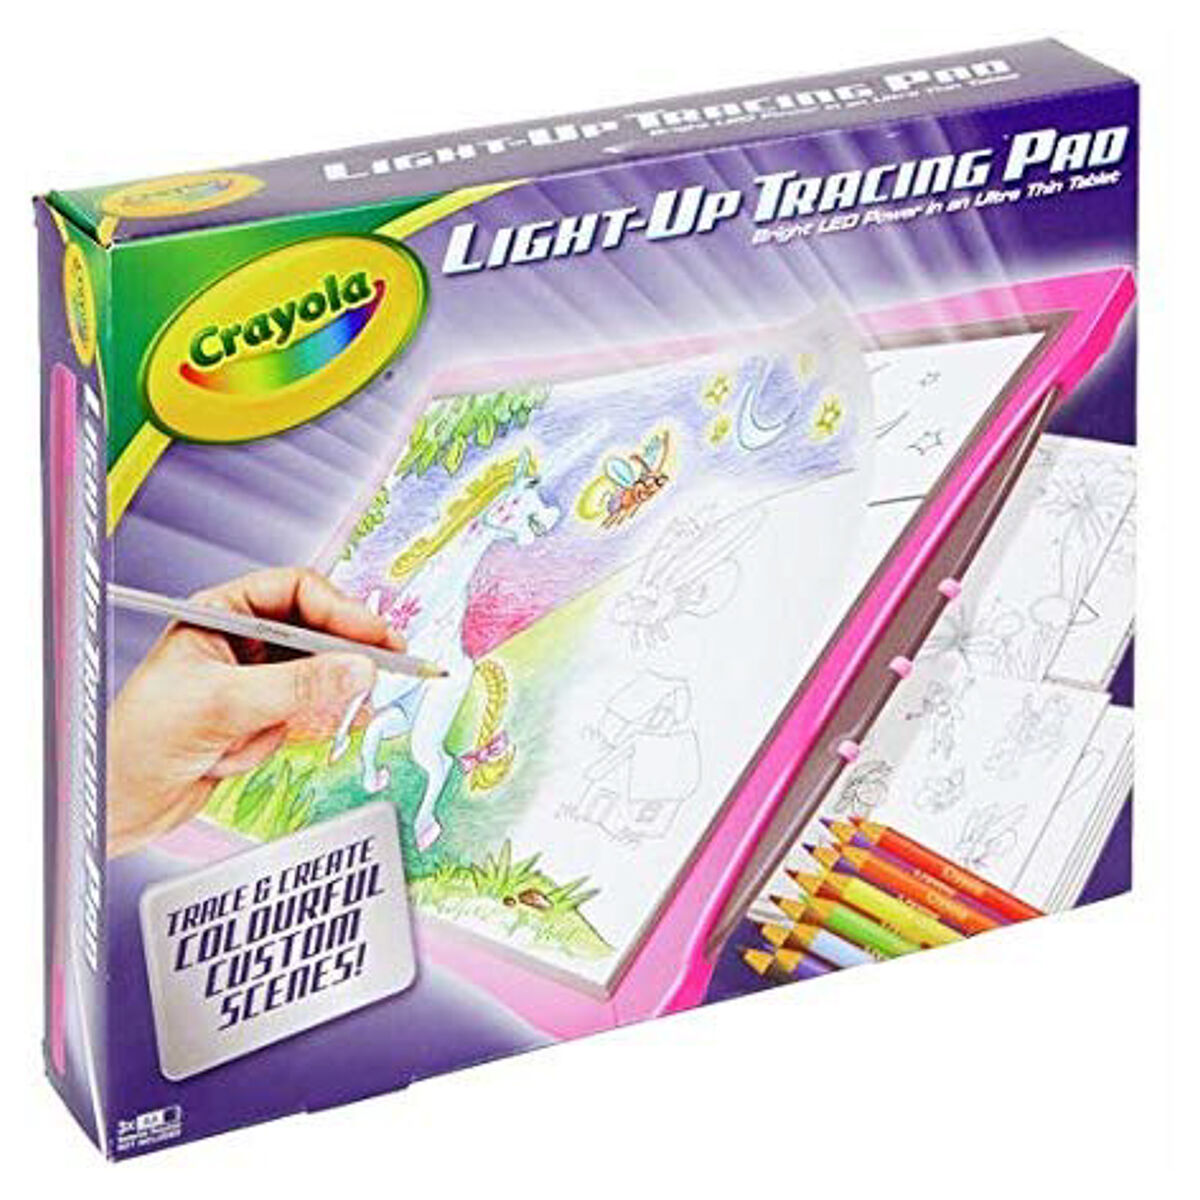 LED Light Up Tracing Pad - Drawing & Colouring - Trace and Create with